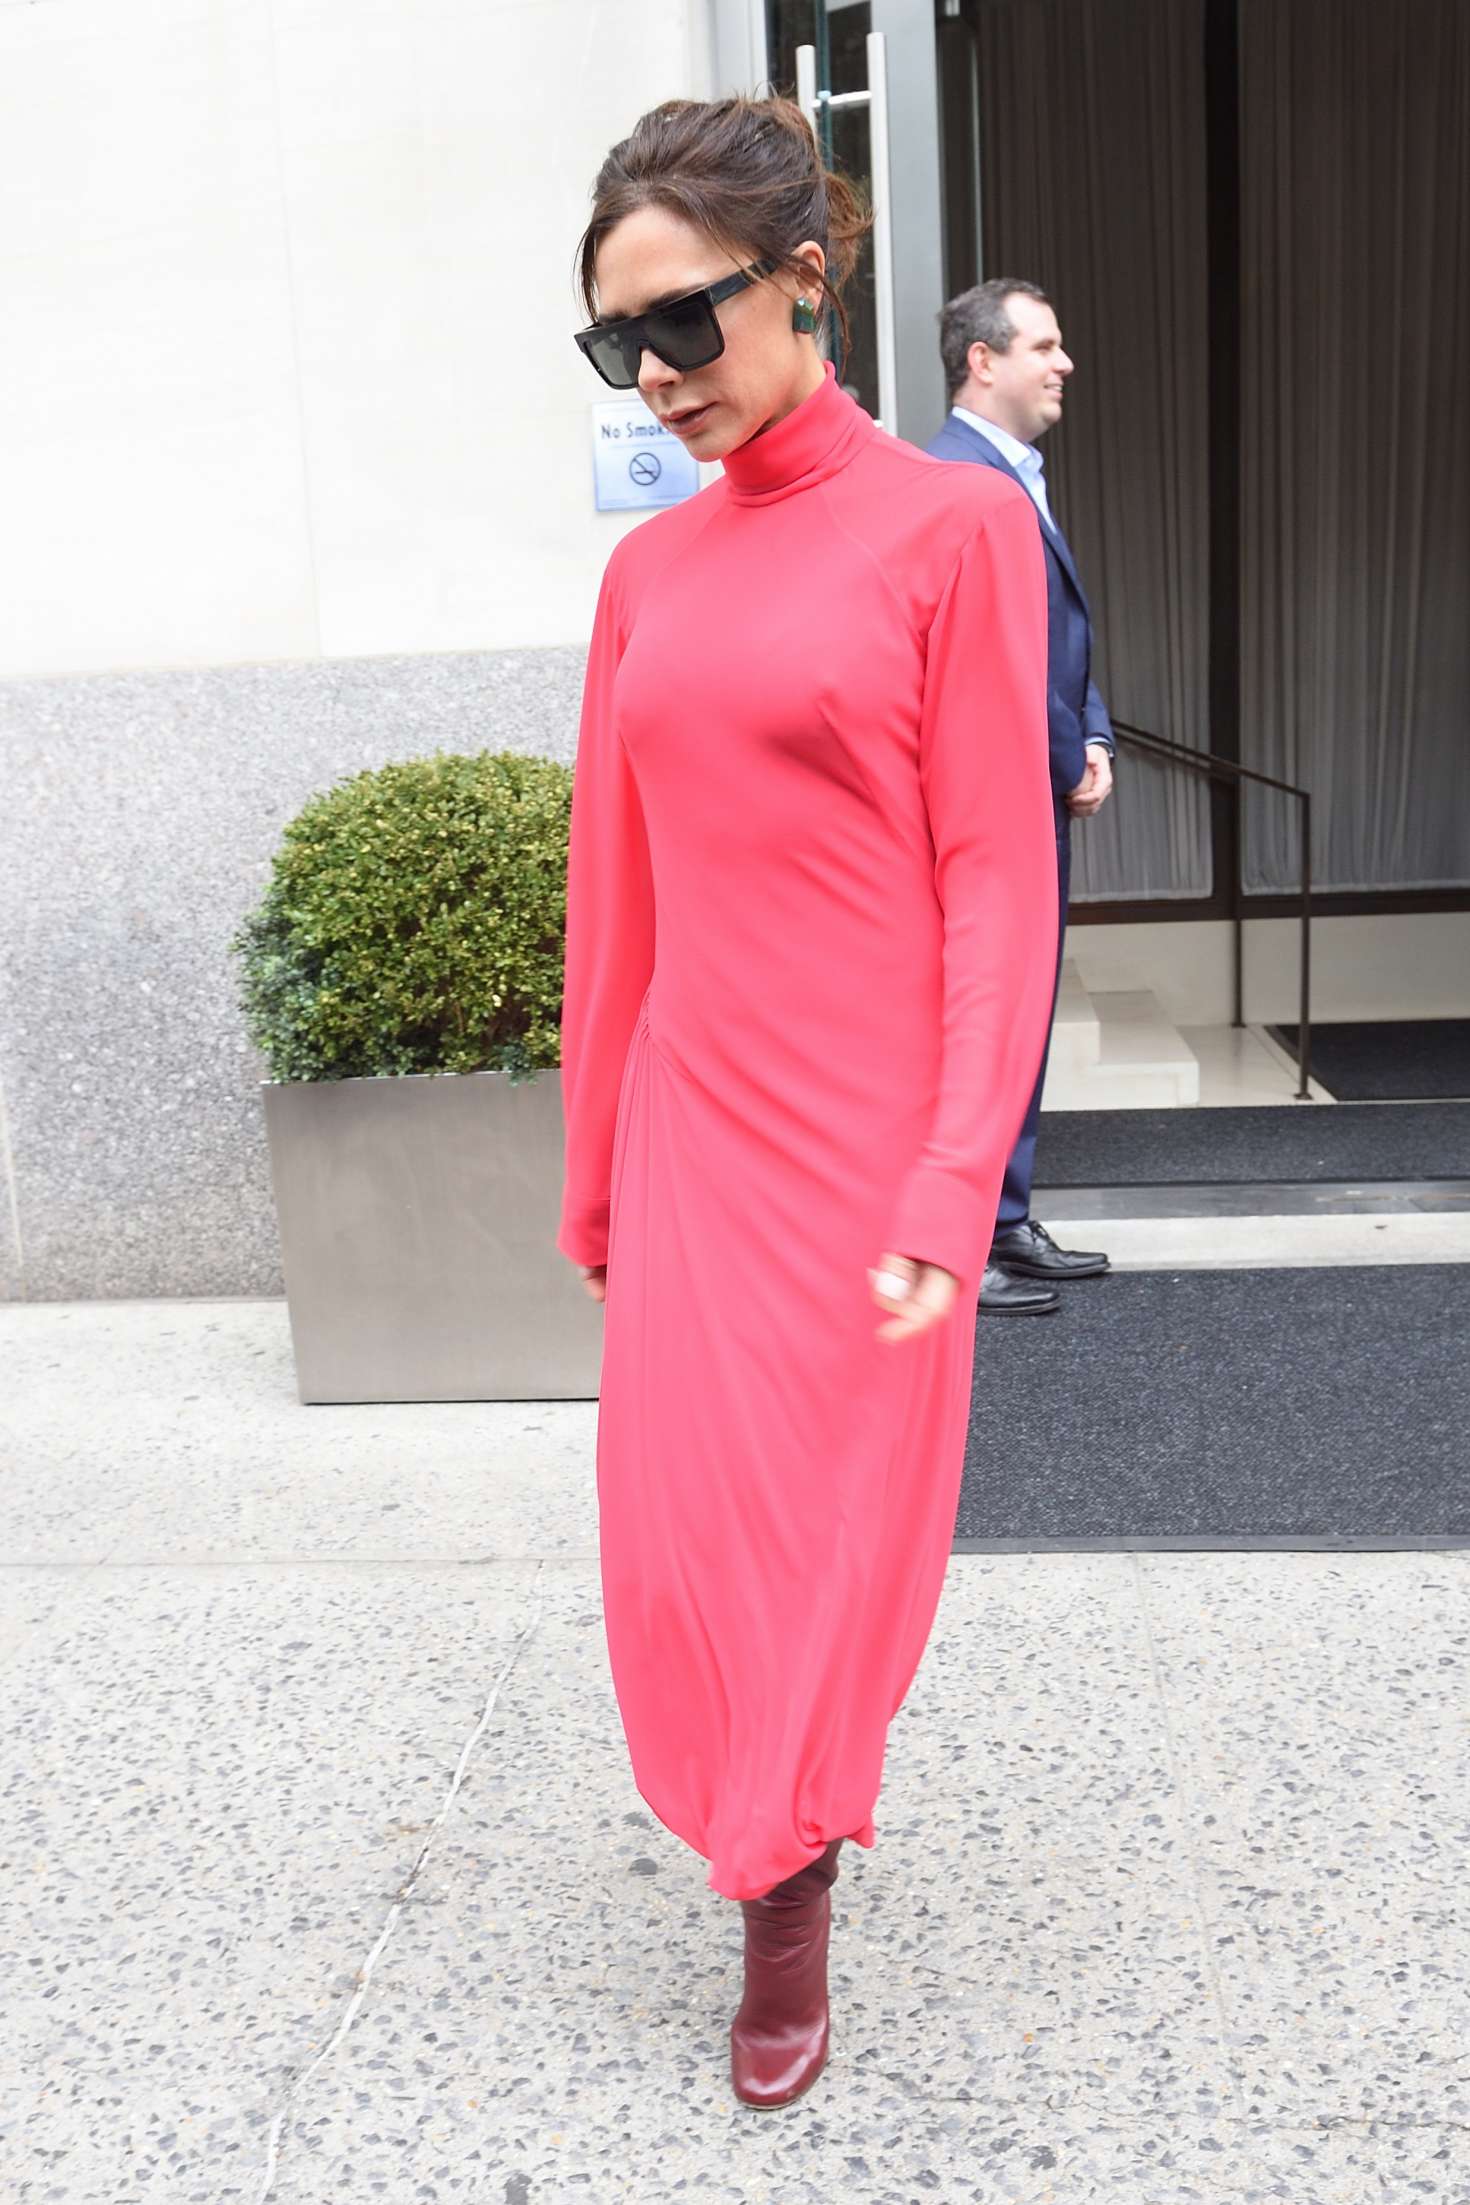 Victoria Beckham in red as she leaves her hotel -22 | GotCeleb